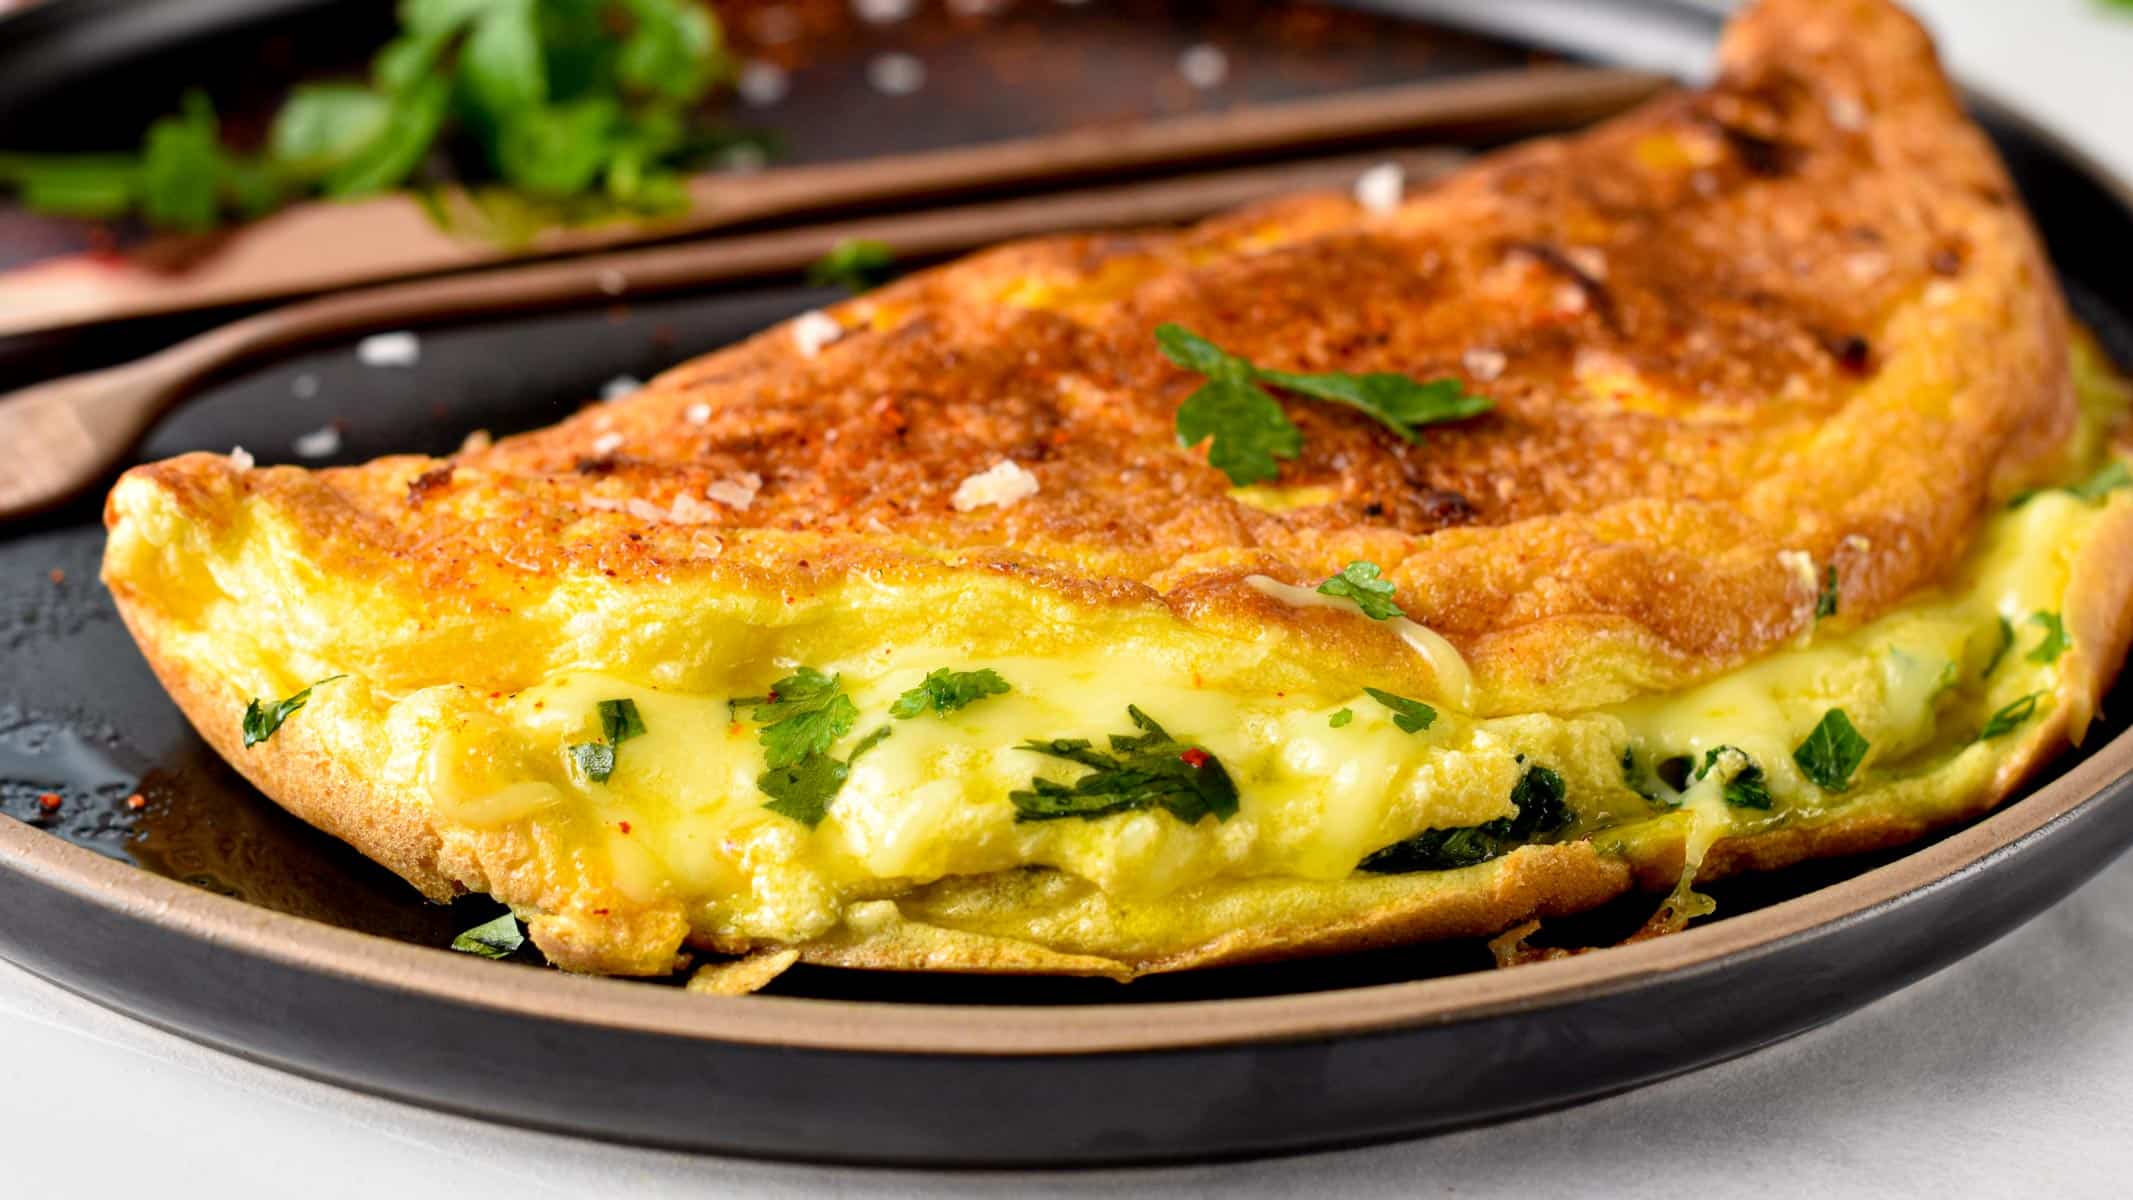 This souffle omelette is the perfect weekend breakfast a light, fluffy omelette with crispy edges and filled with herbs and cheese. Plus, this is a healthy breakfast packed with protein to keep you full for hours and it takes barely 15 minutes to make.